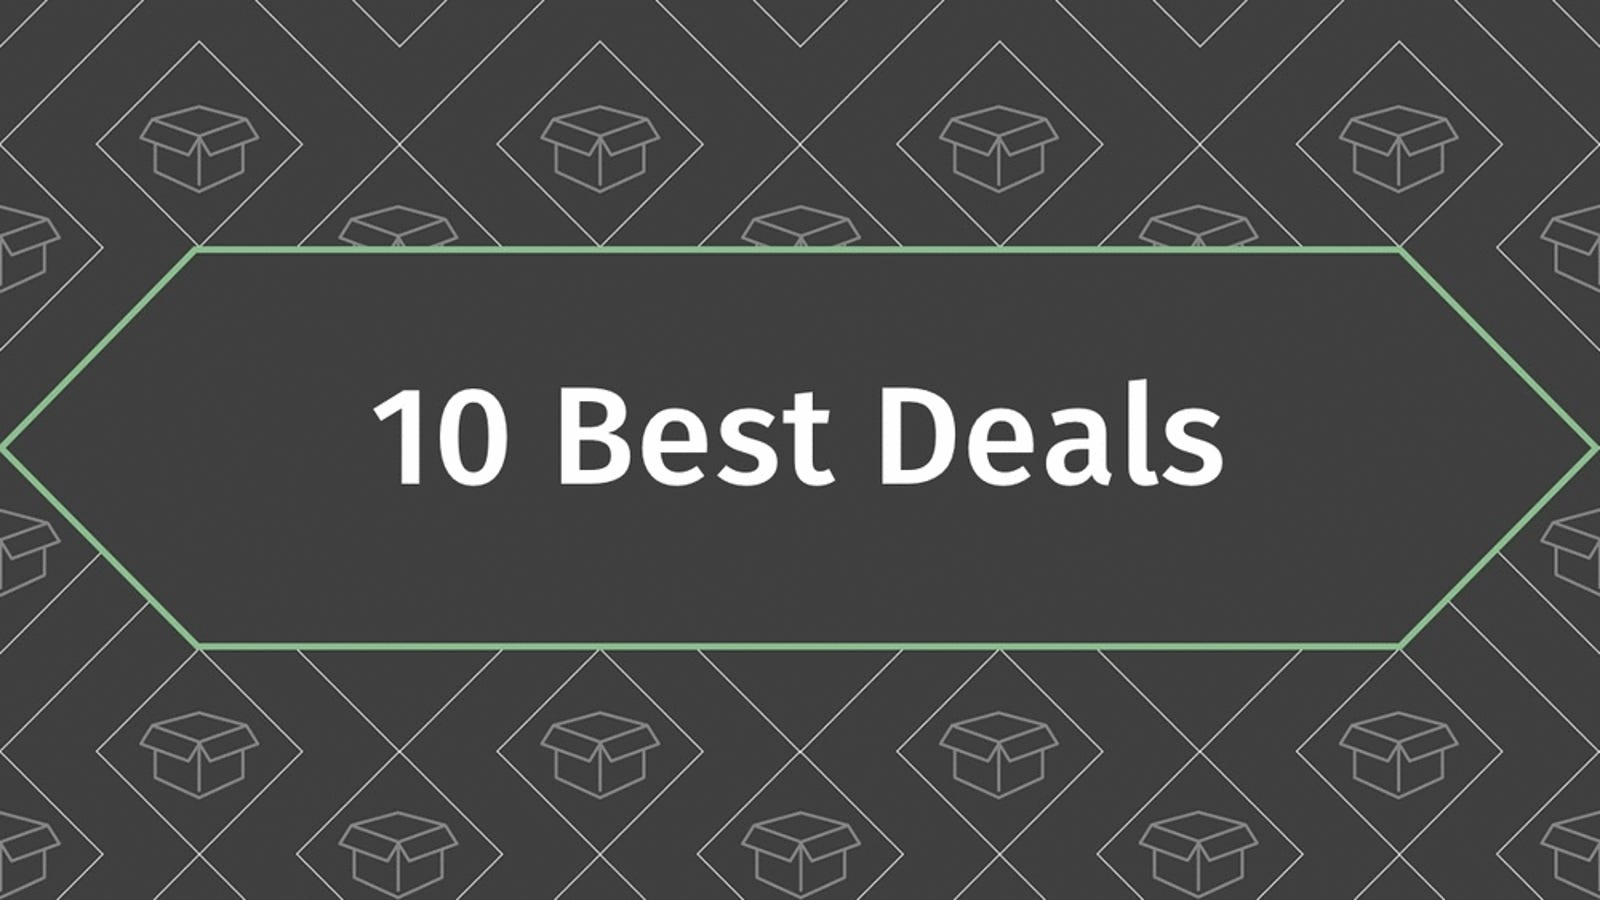 photo of The 10 Best Deals of May 22, 2018 image